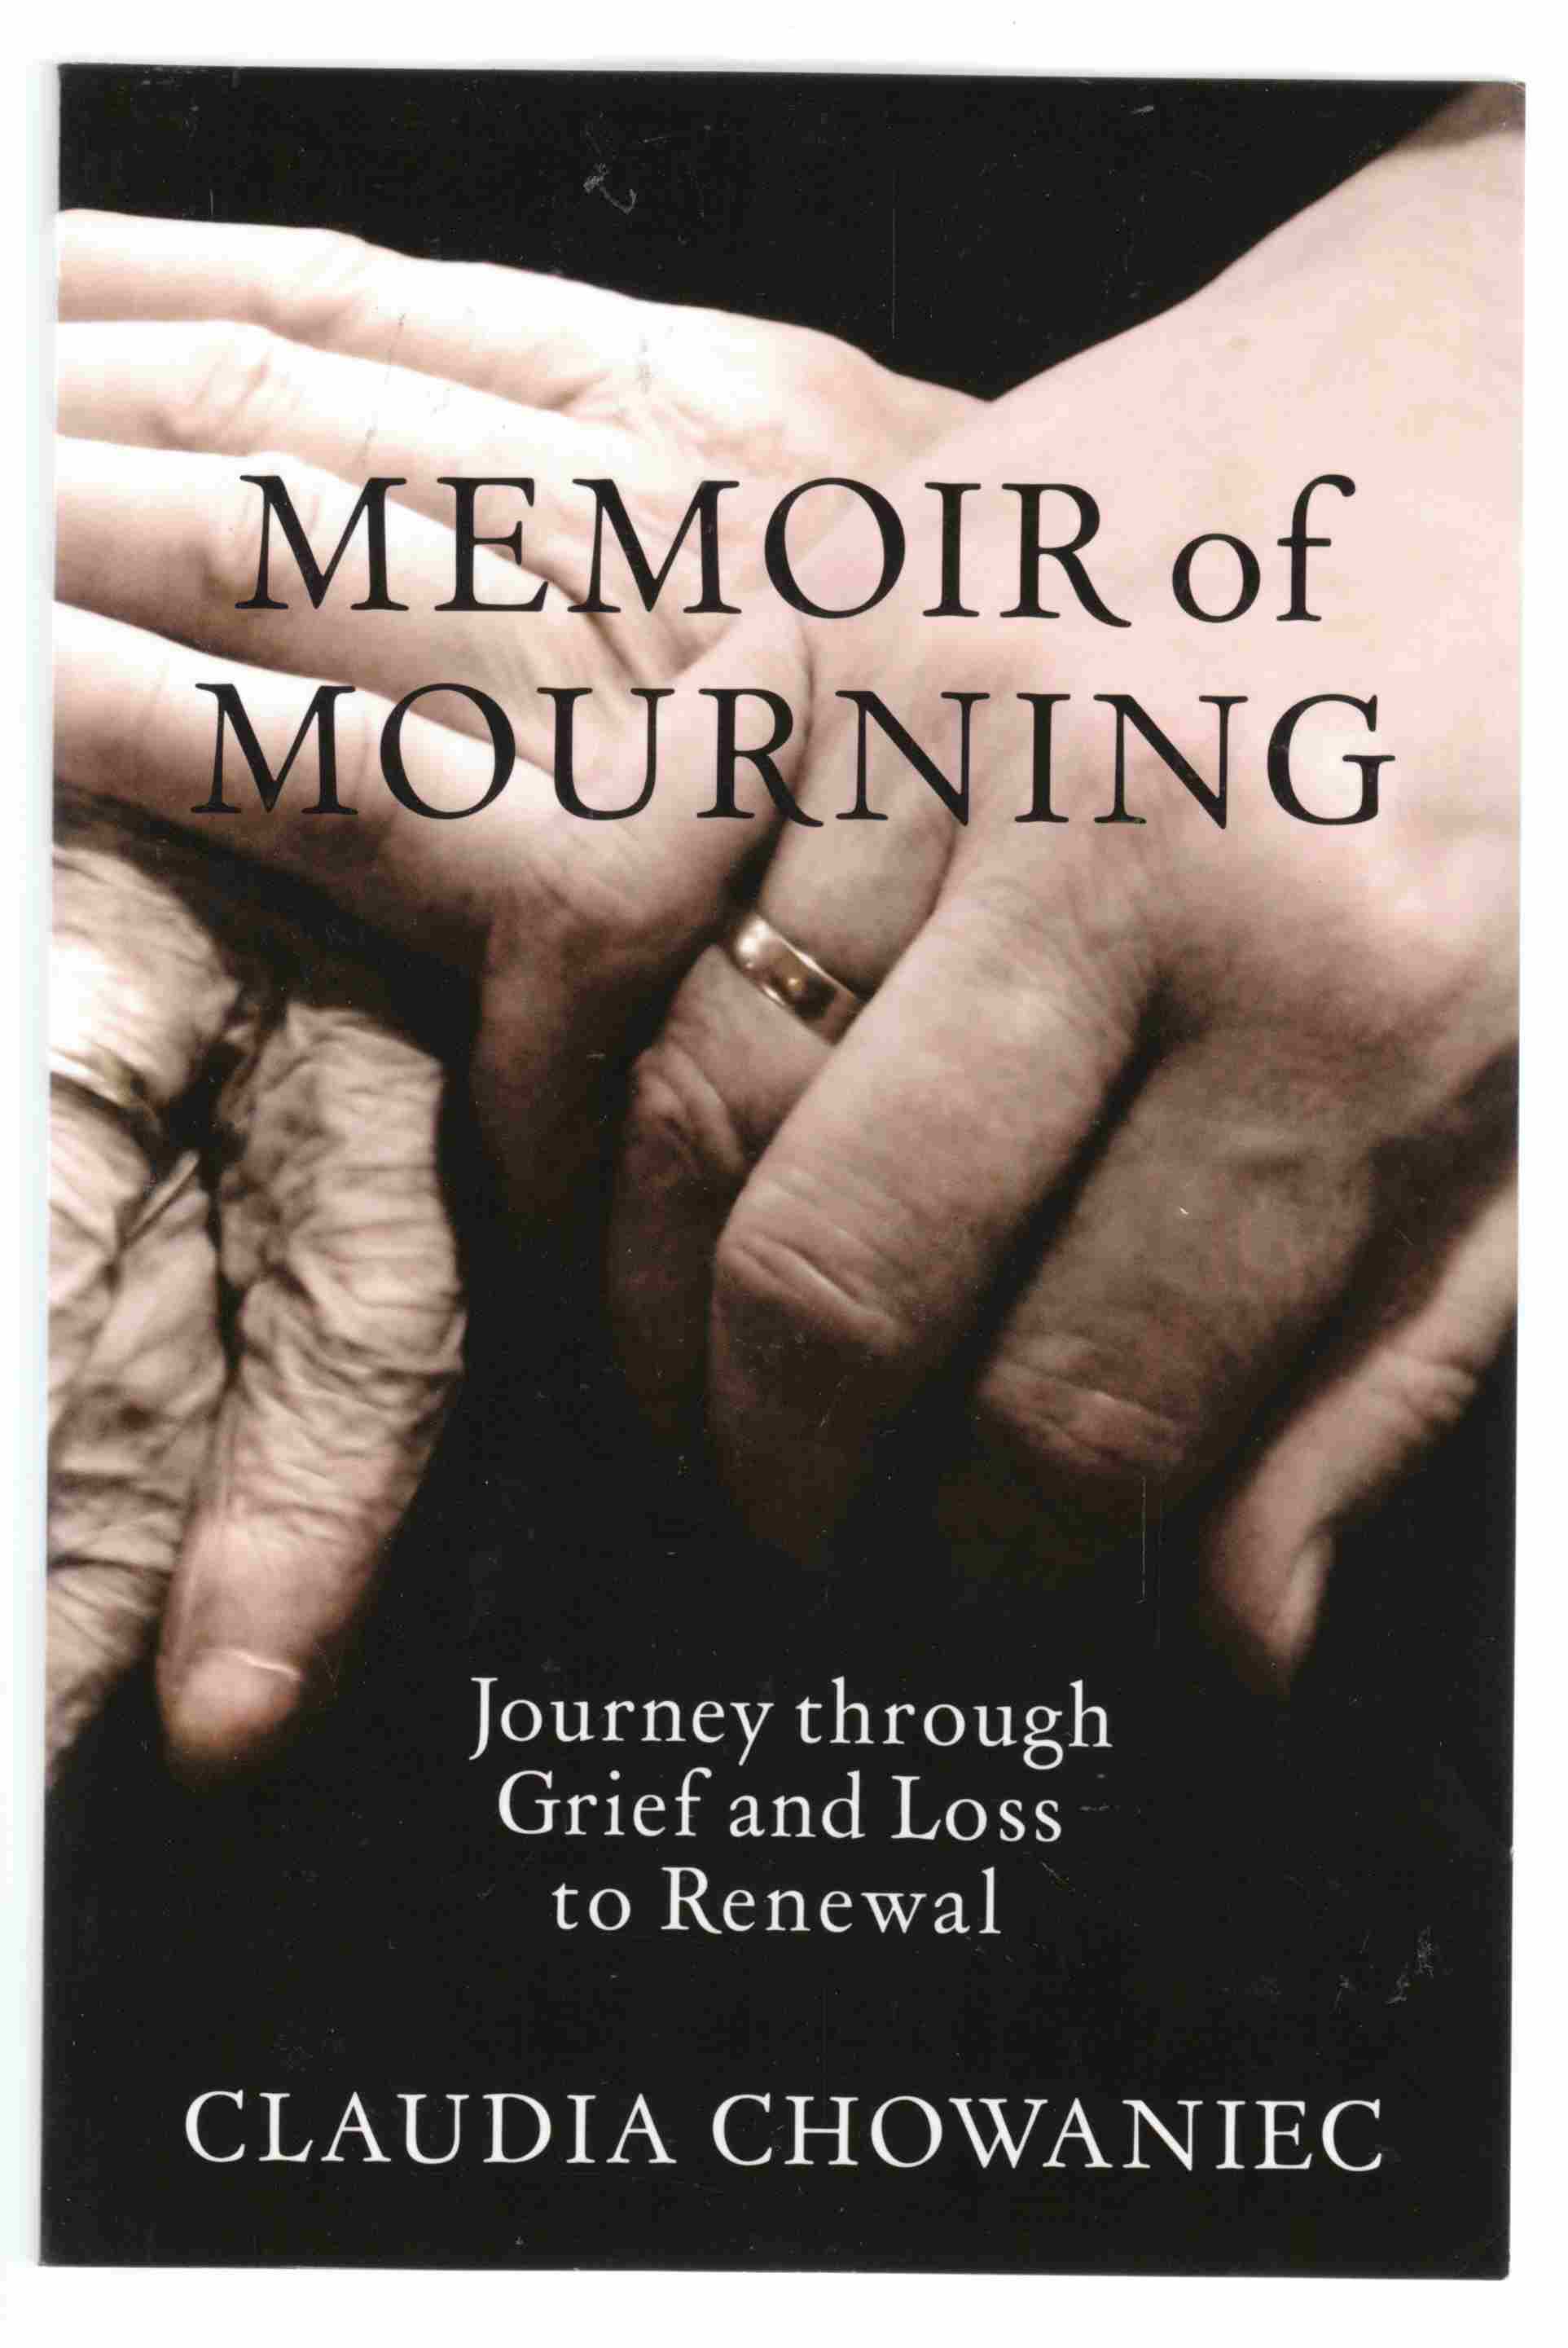 Image for Memoir of Mourning Journey through Grief and Loss to Renewal